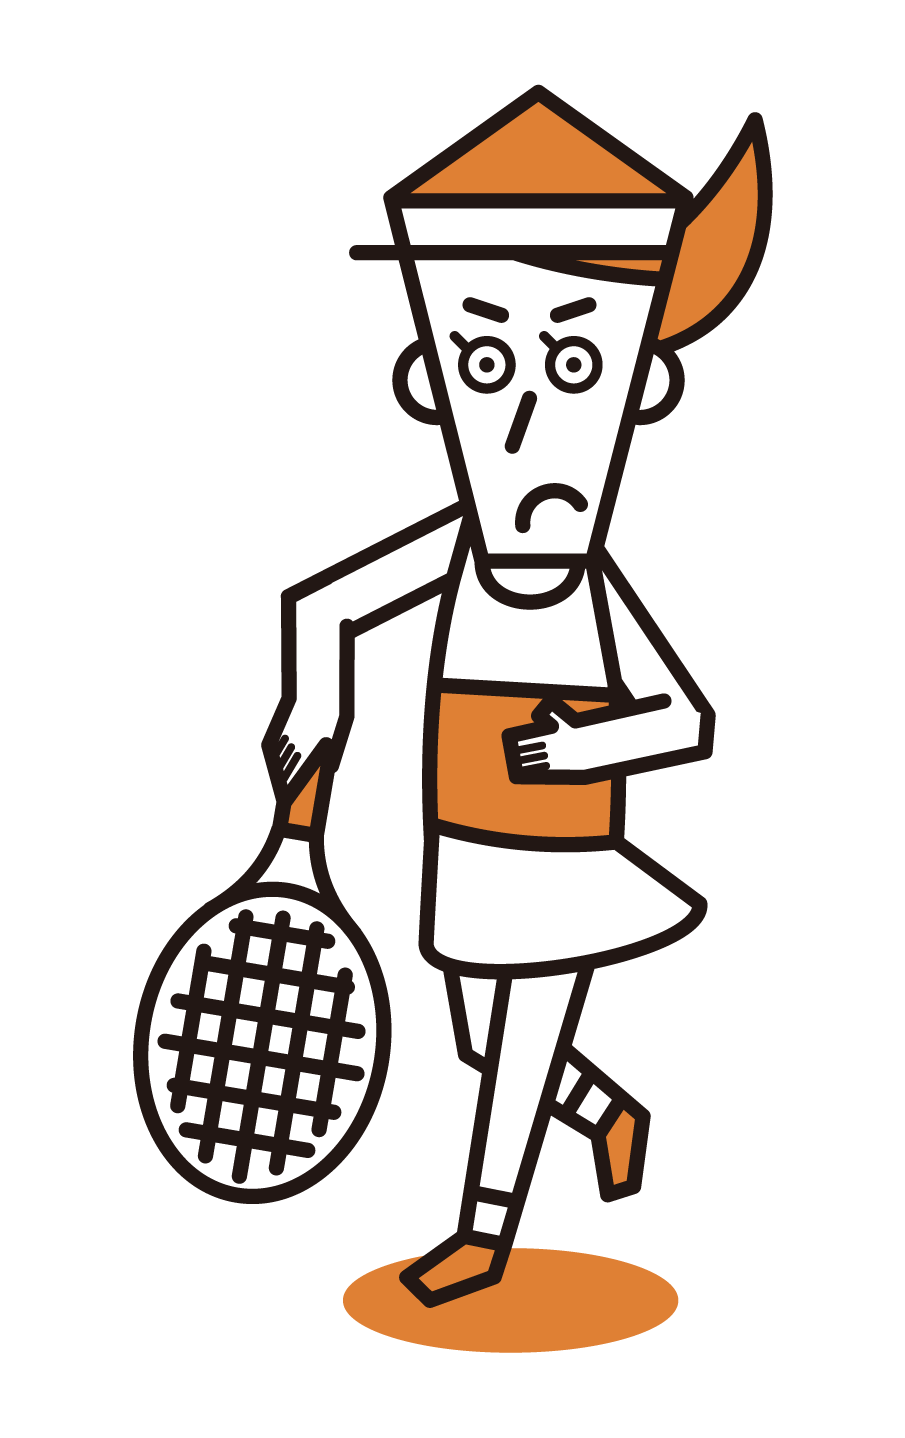 Illustration of a tennis player (female) who hits a serve